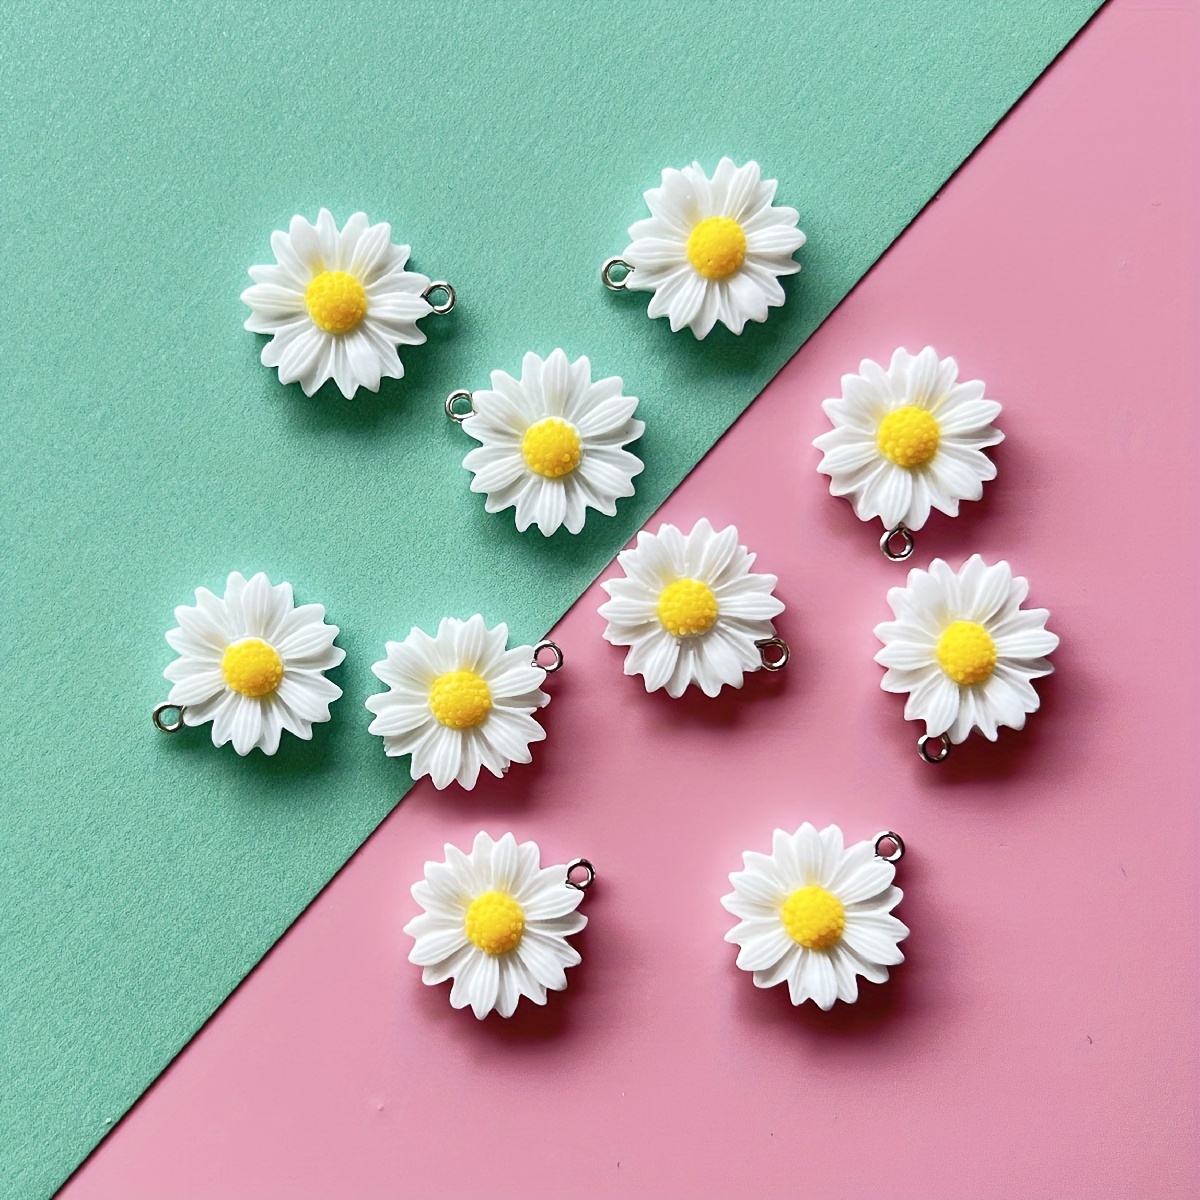 

10pcs Bright White Chrysanthemum Summer Flower Charm Lovely Daisy Pendant For Diy Accessories Can Be Used To Make Earrings And Necklaces